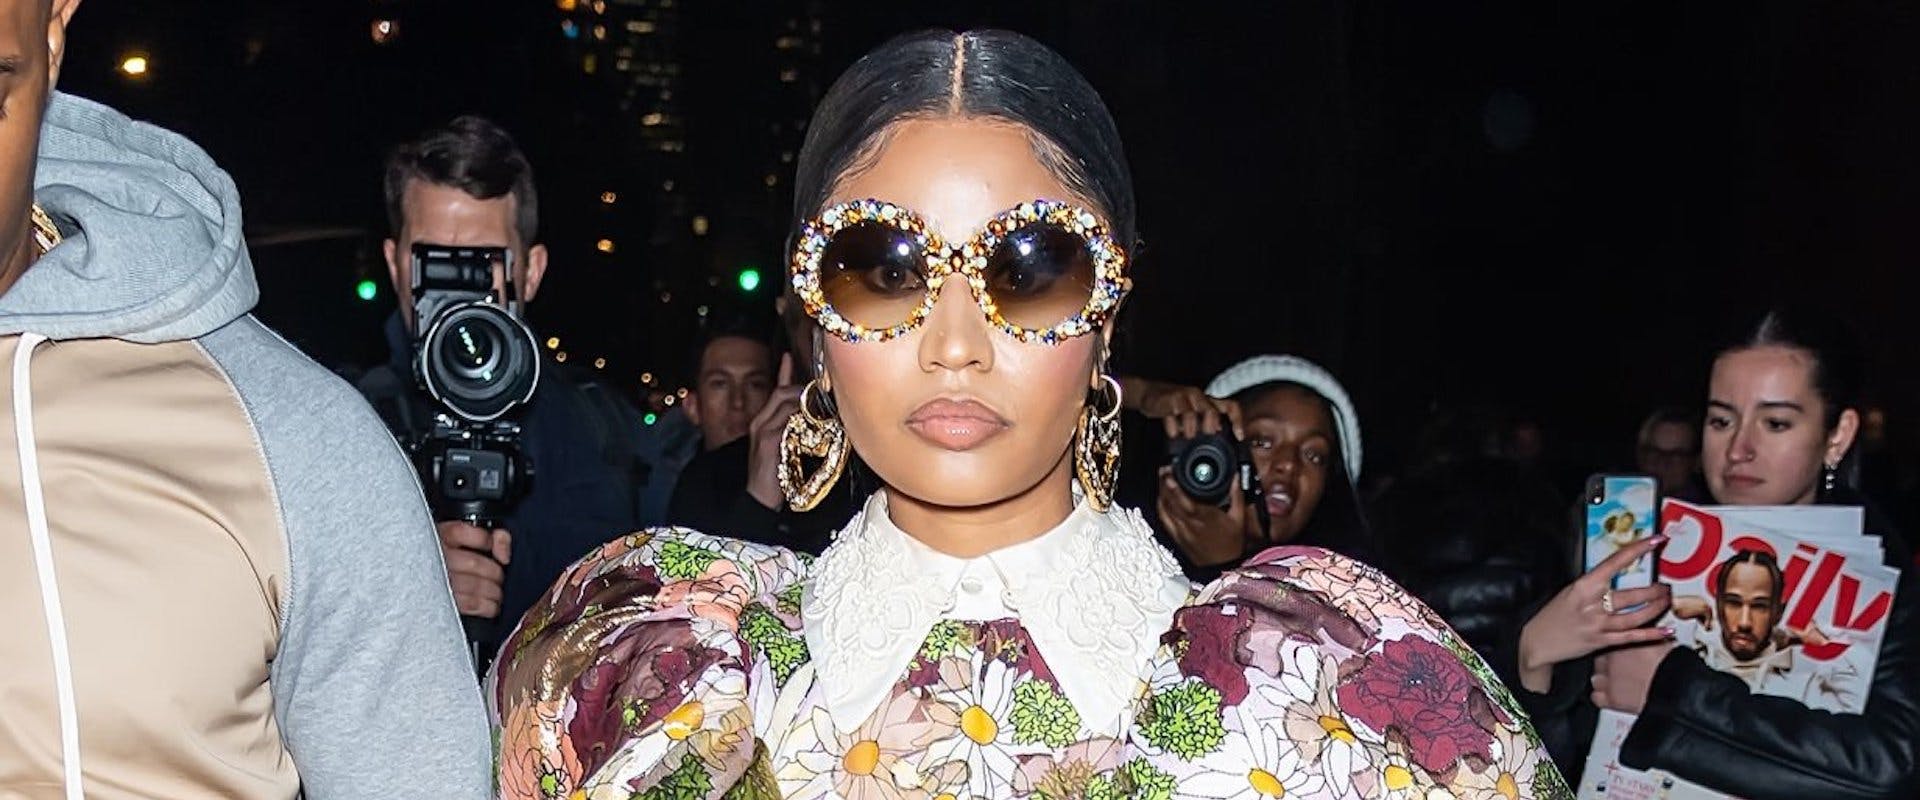 Rapper Nicki Minaj is seen leaving the Marc Jacobs Fall 2020 runway show during New York Fashion Week on February 12, 2020 in New York City. (Photo by Gilbert Carrasquillo/GC Images)